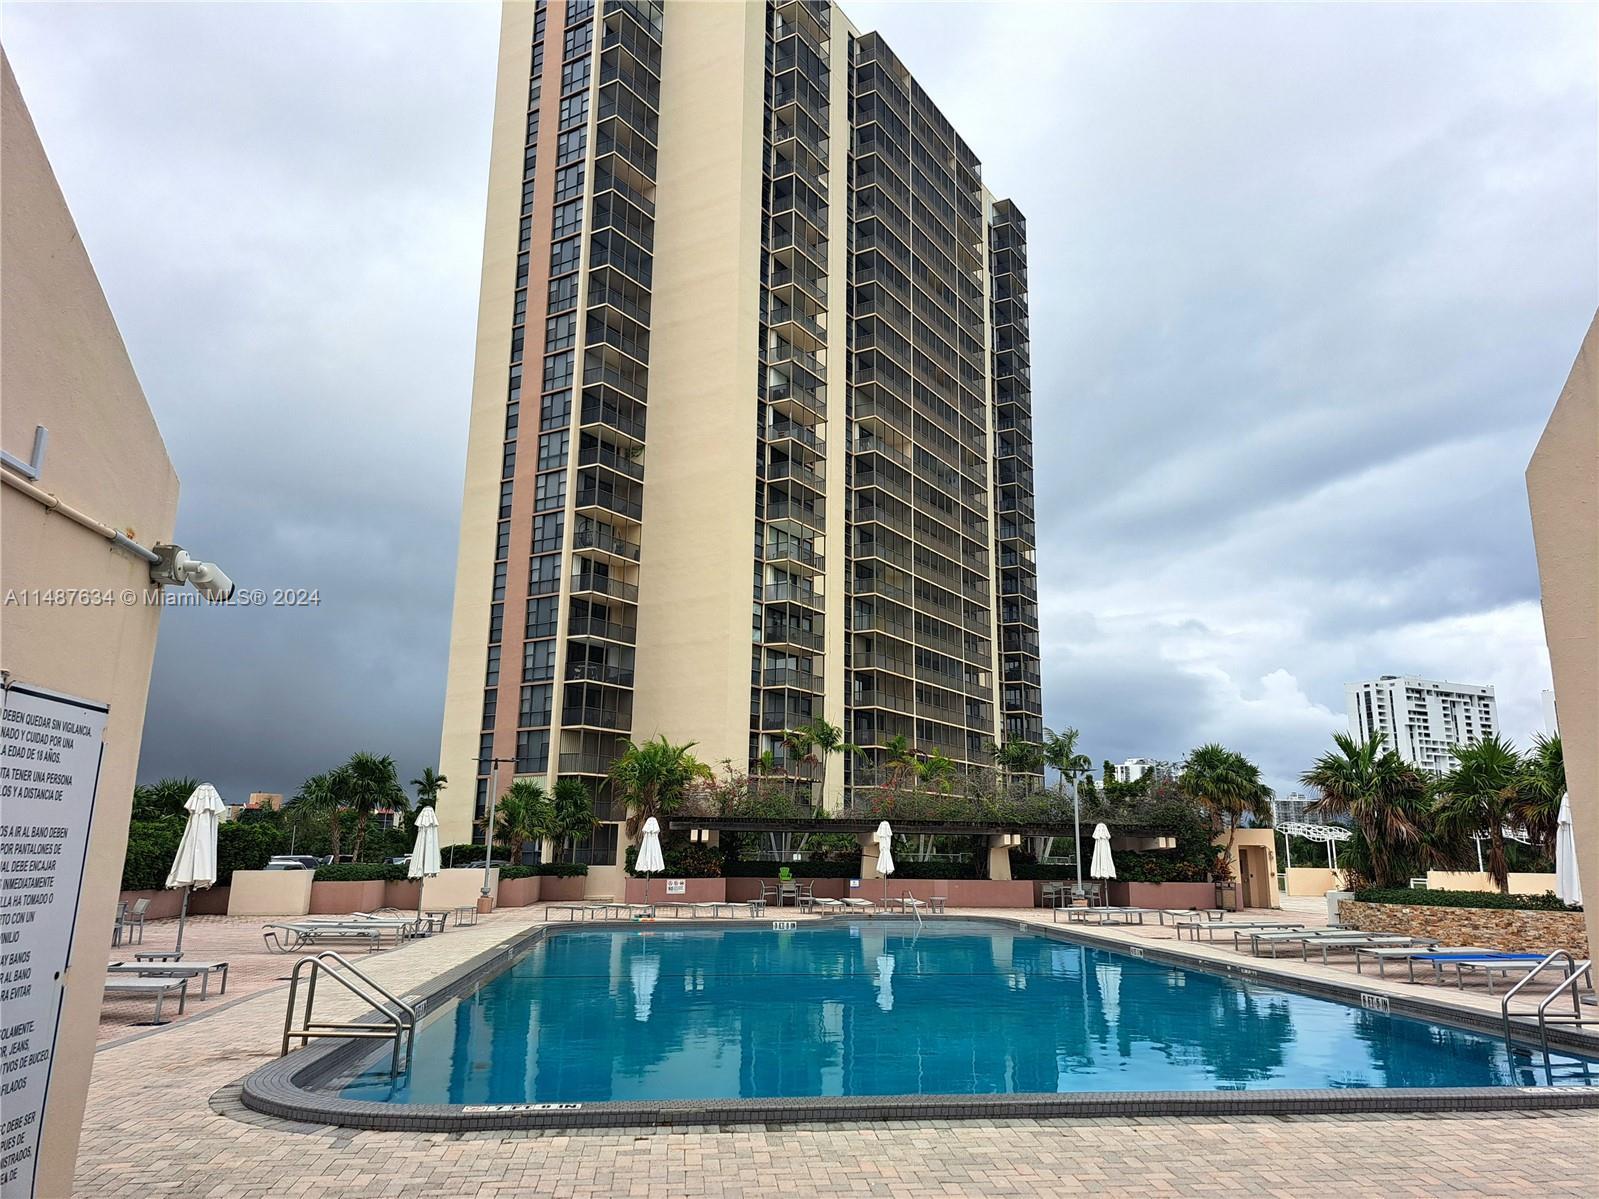 Photo of 20301 W Country Club Dr #2327 in Aventura, FL